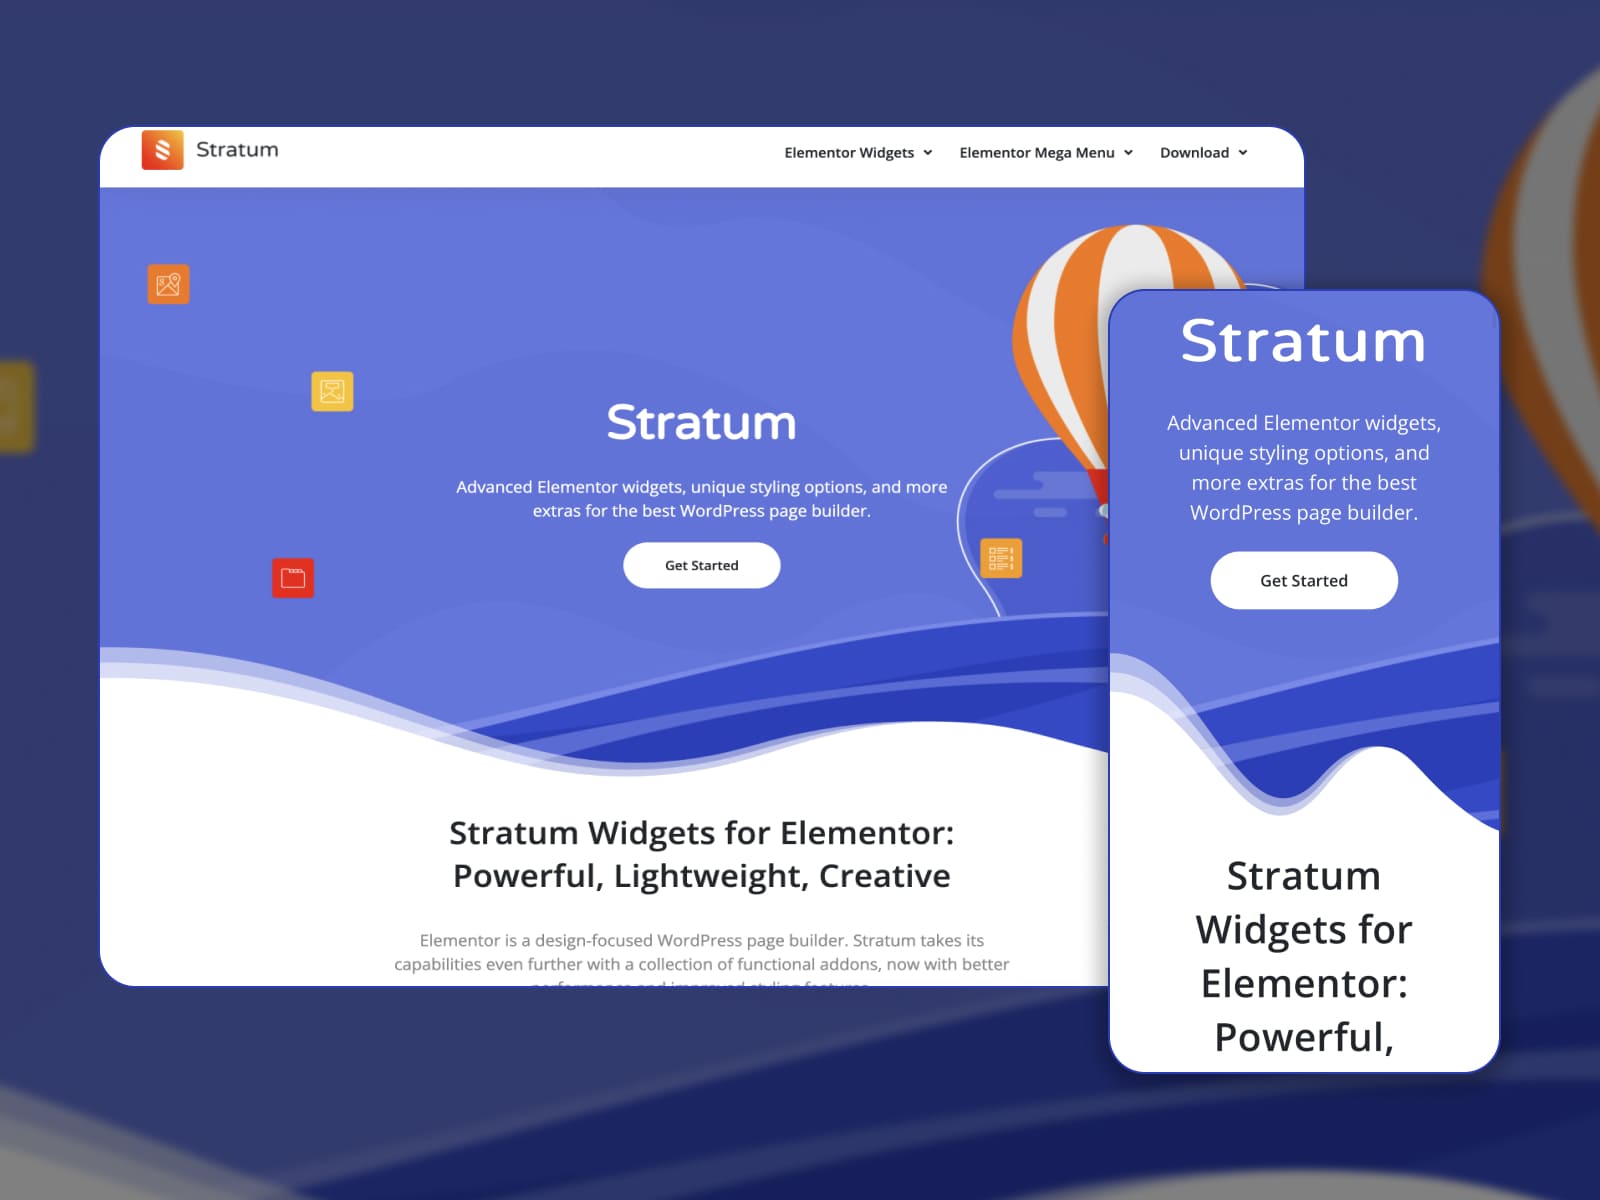 The landing page of the Stratum free widget.